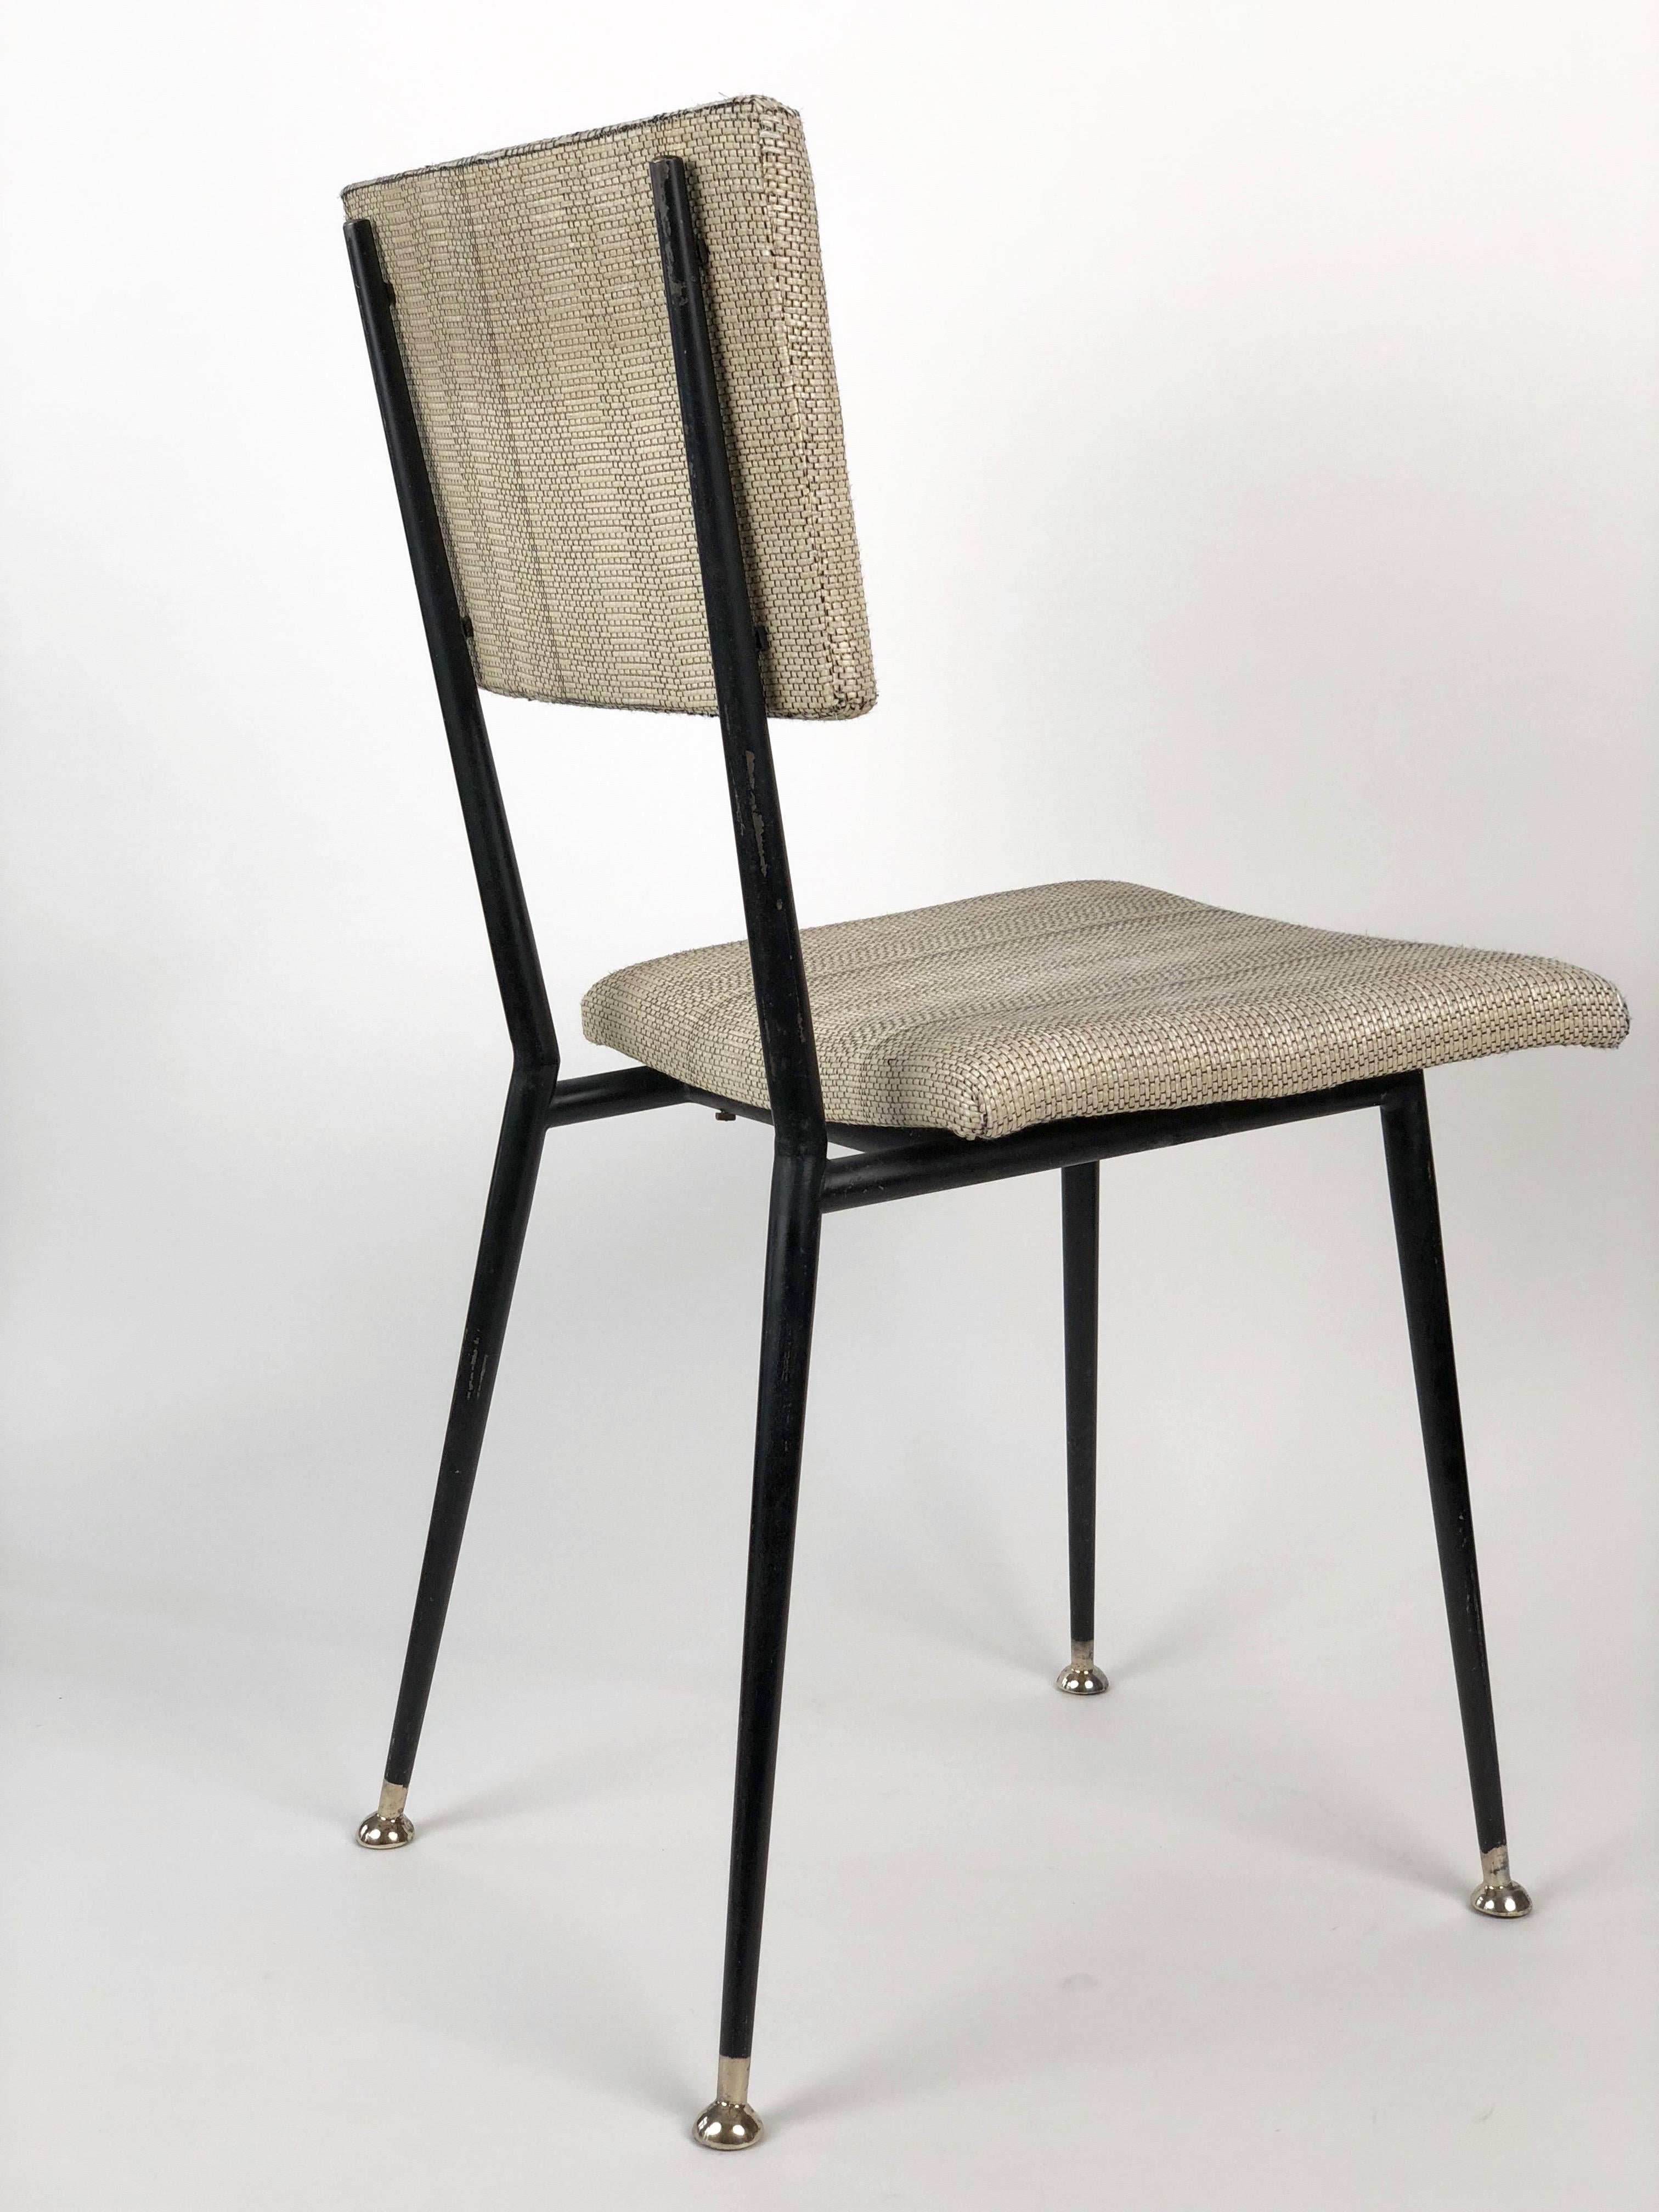 Blackened Midcentury Chair from Sonnet, Made in Austria For Sale